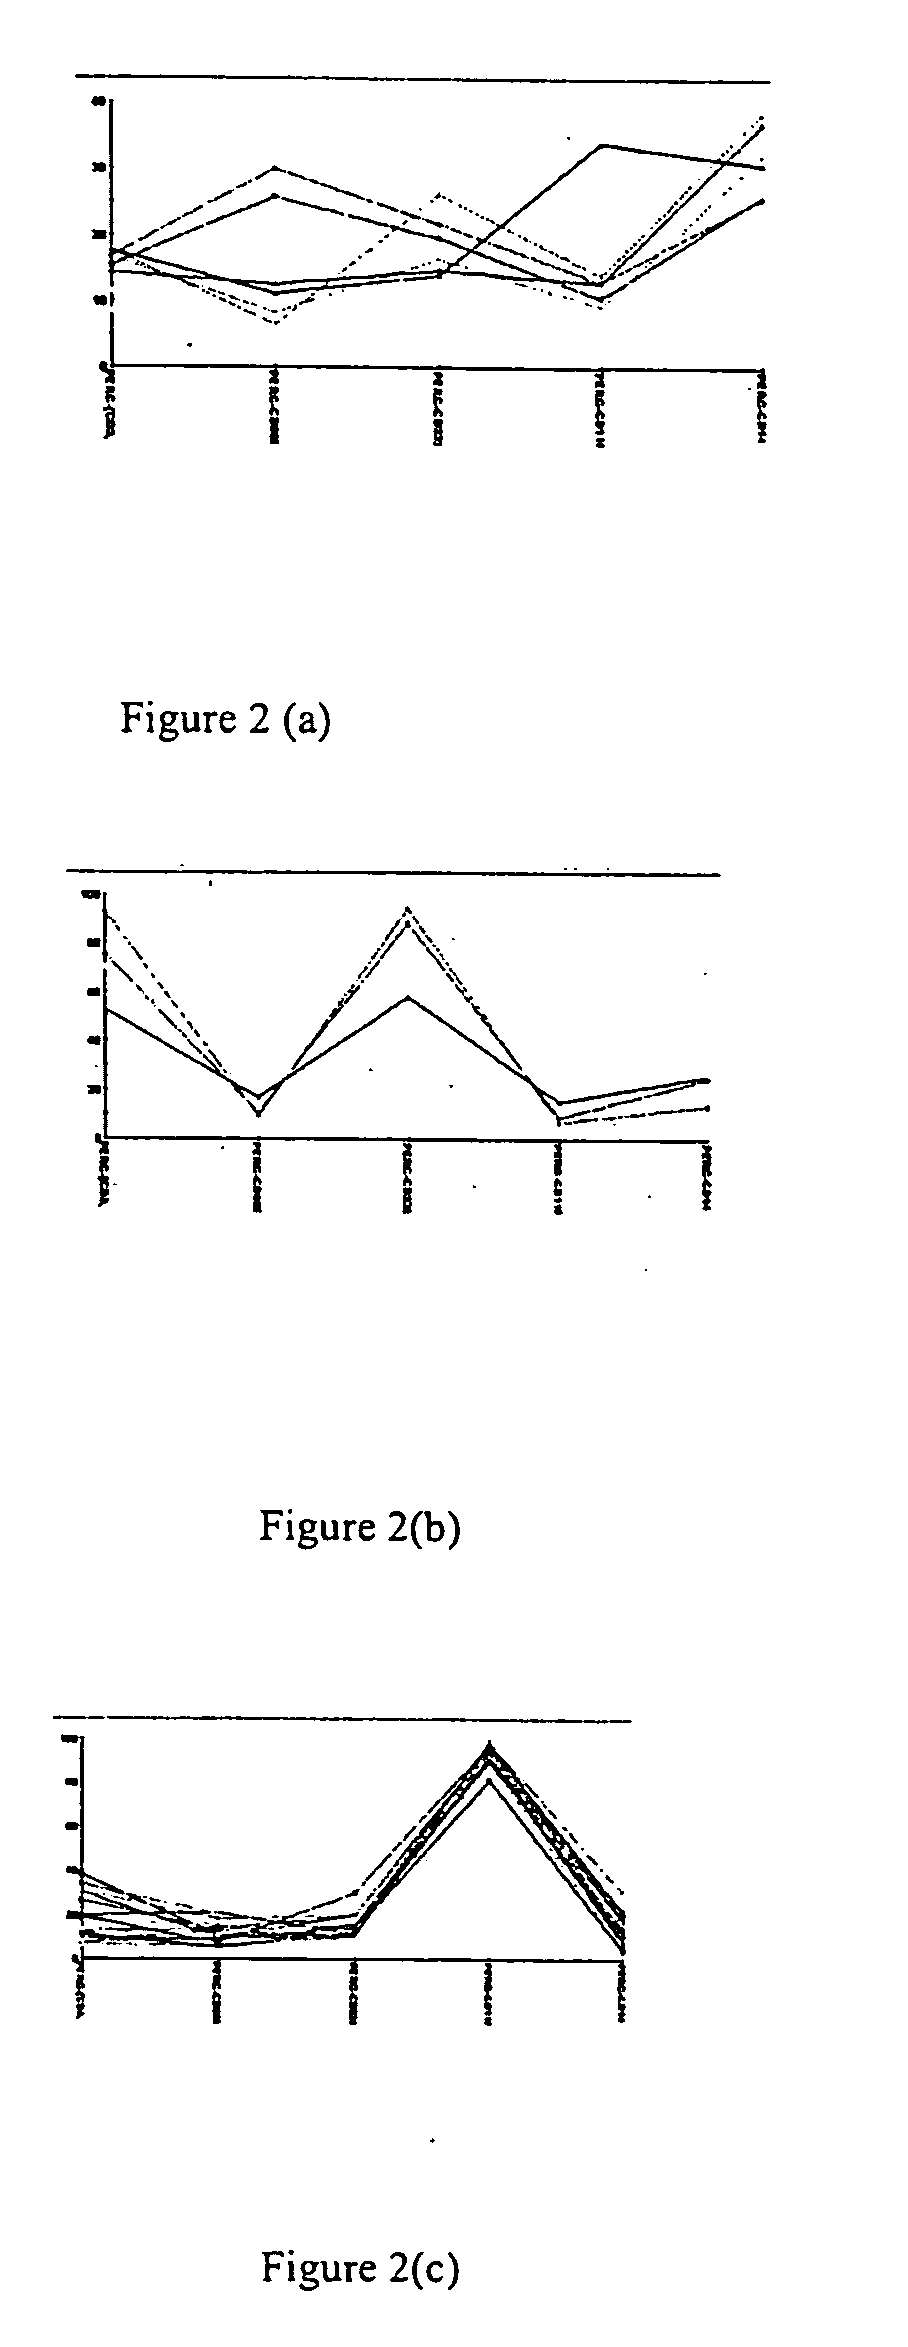 Methods for identifying conditions affecting a cell state